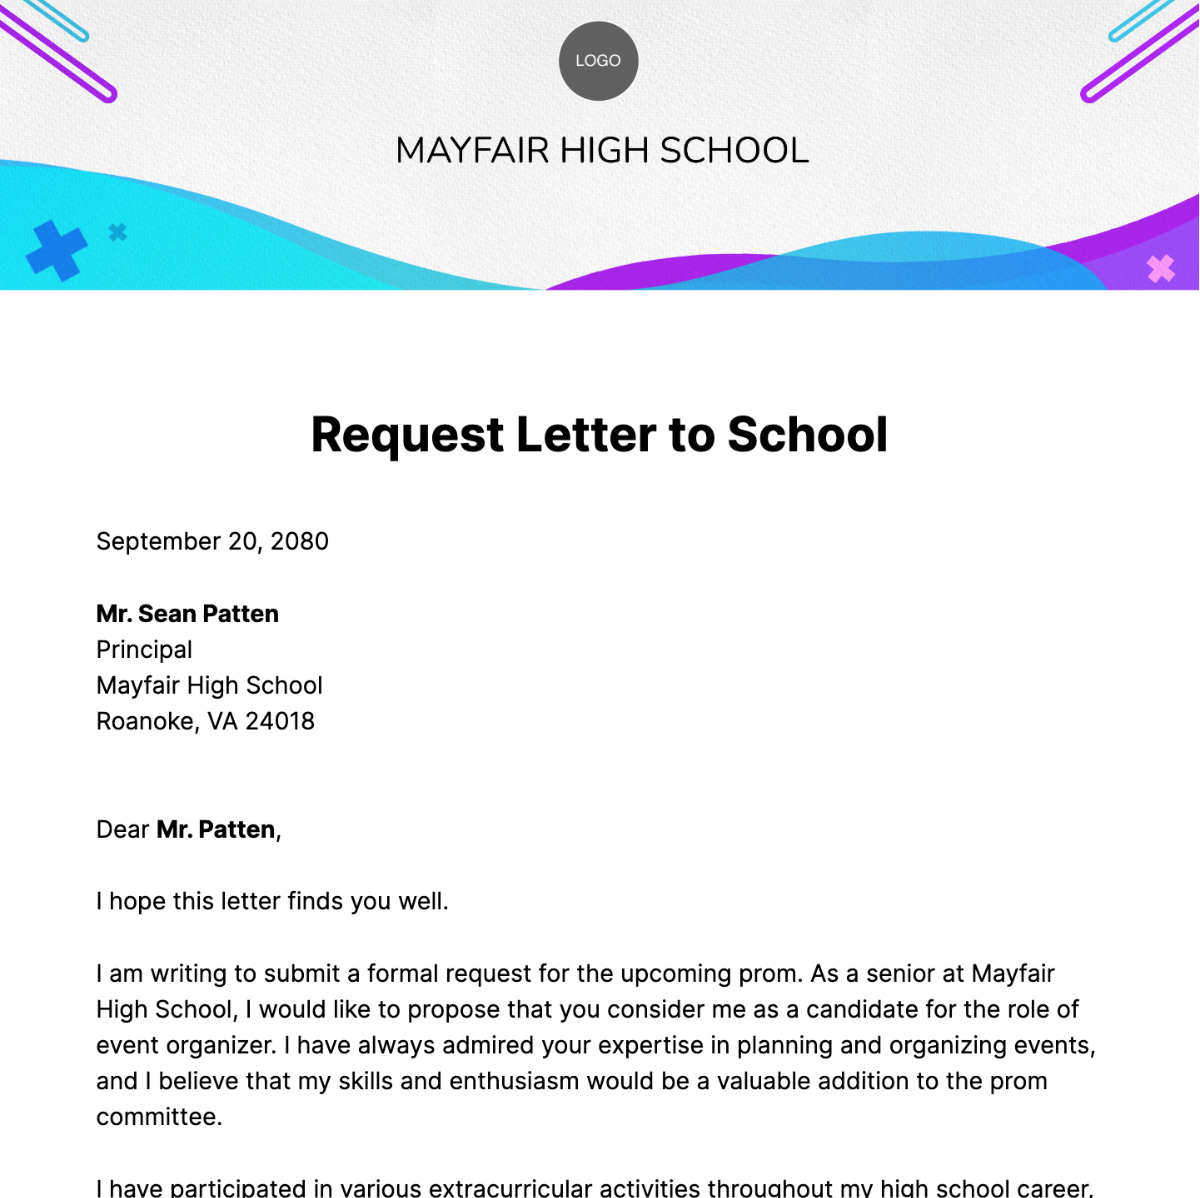 Request Letter to School  Template